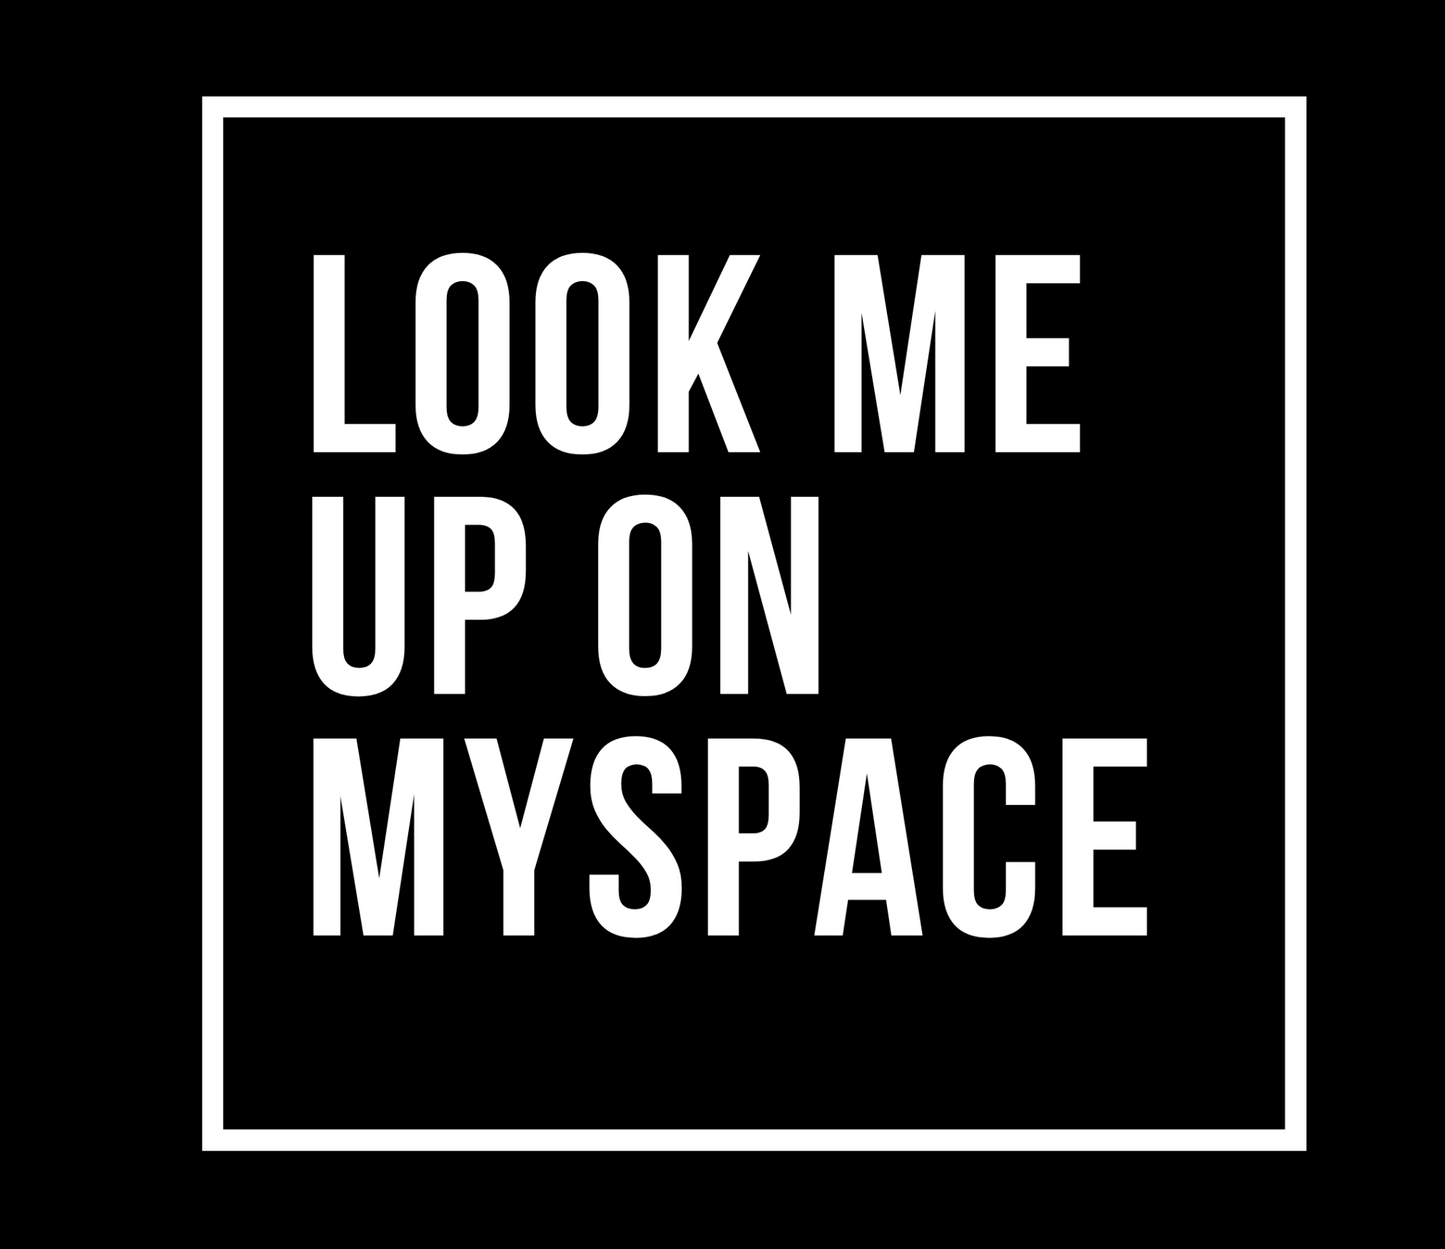 LOOK ME UP ON MYSPACE -  Obnoxious Apparel - Funny Offensive Shirts for Men